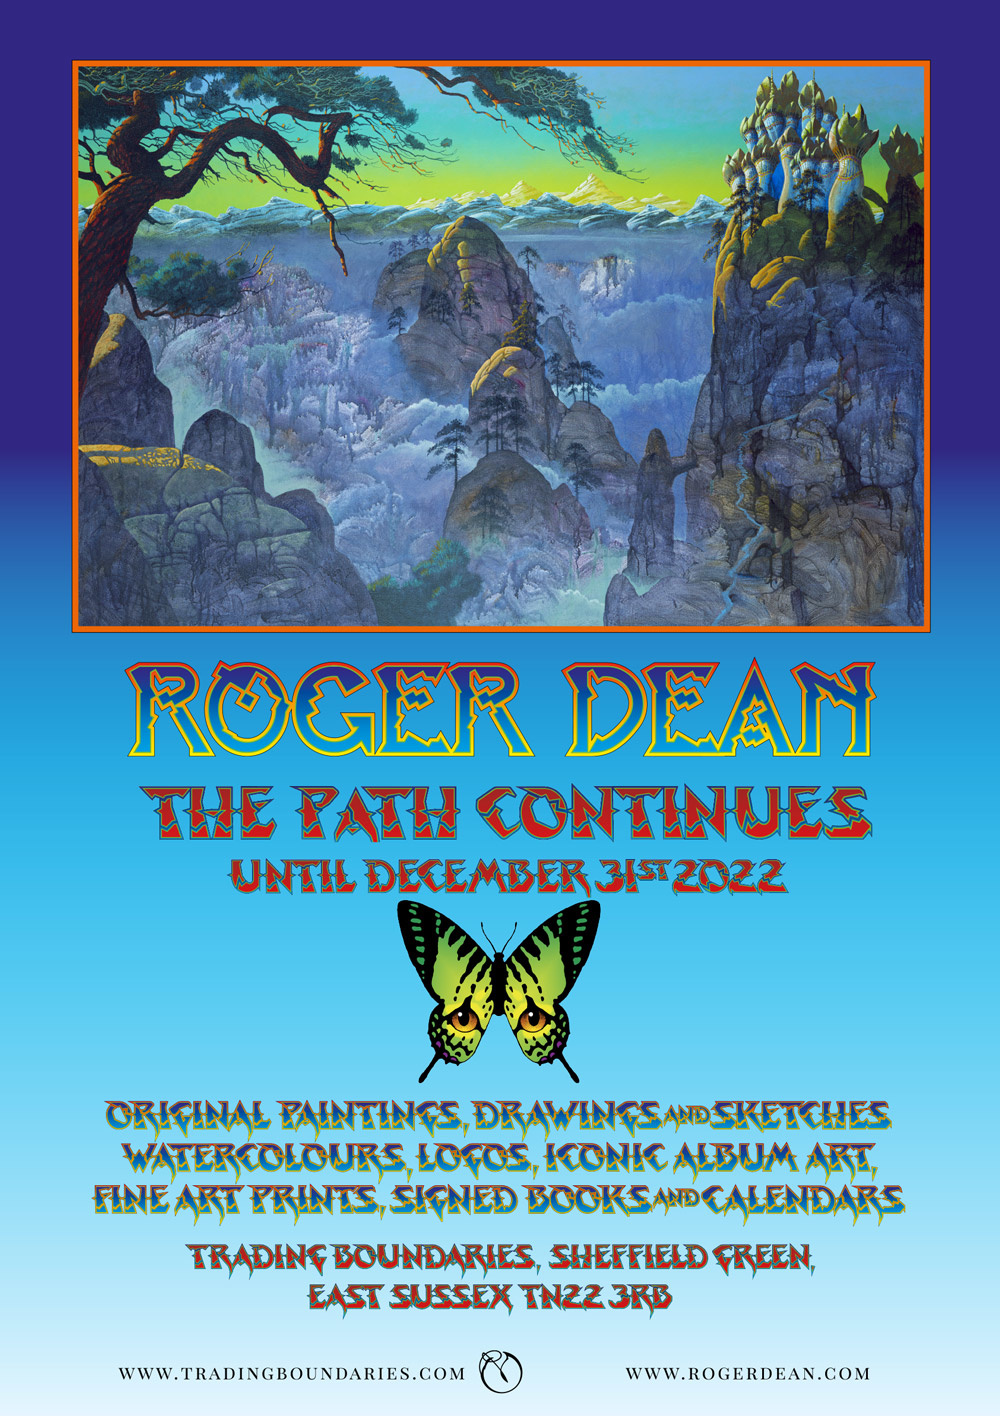 Roger Dean Exhibition Trading Boundaries Art 'The Path Continues' 2022